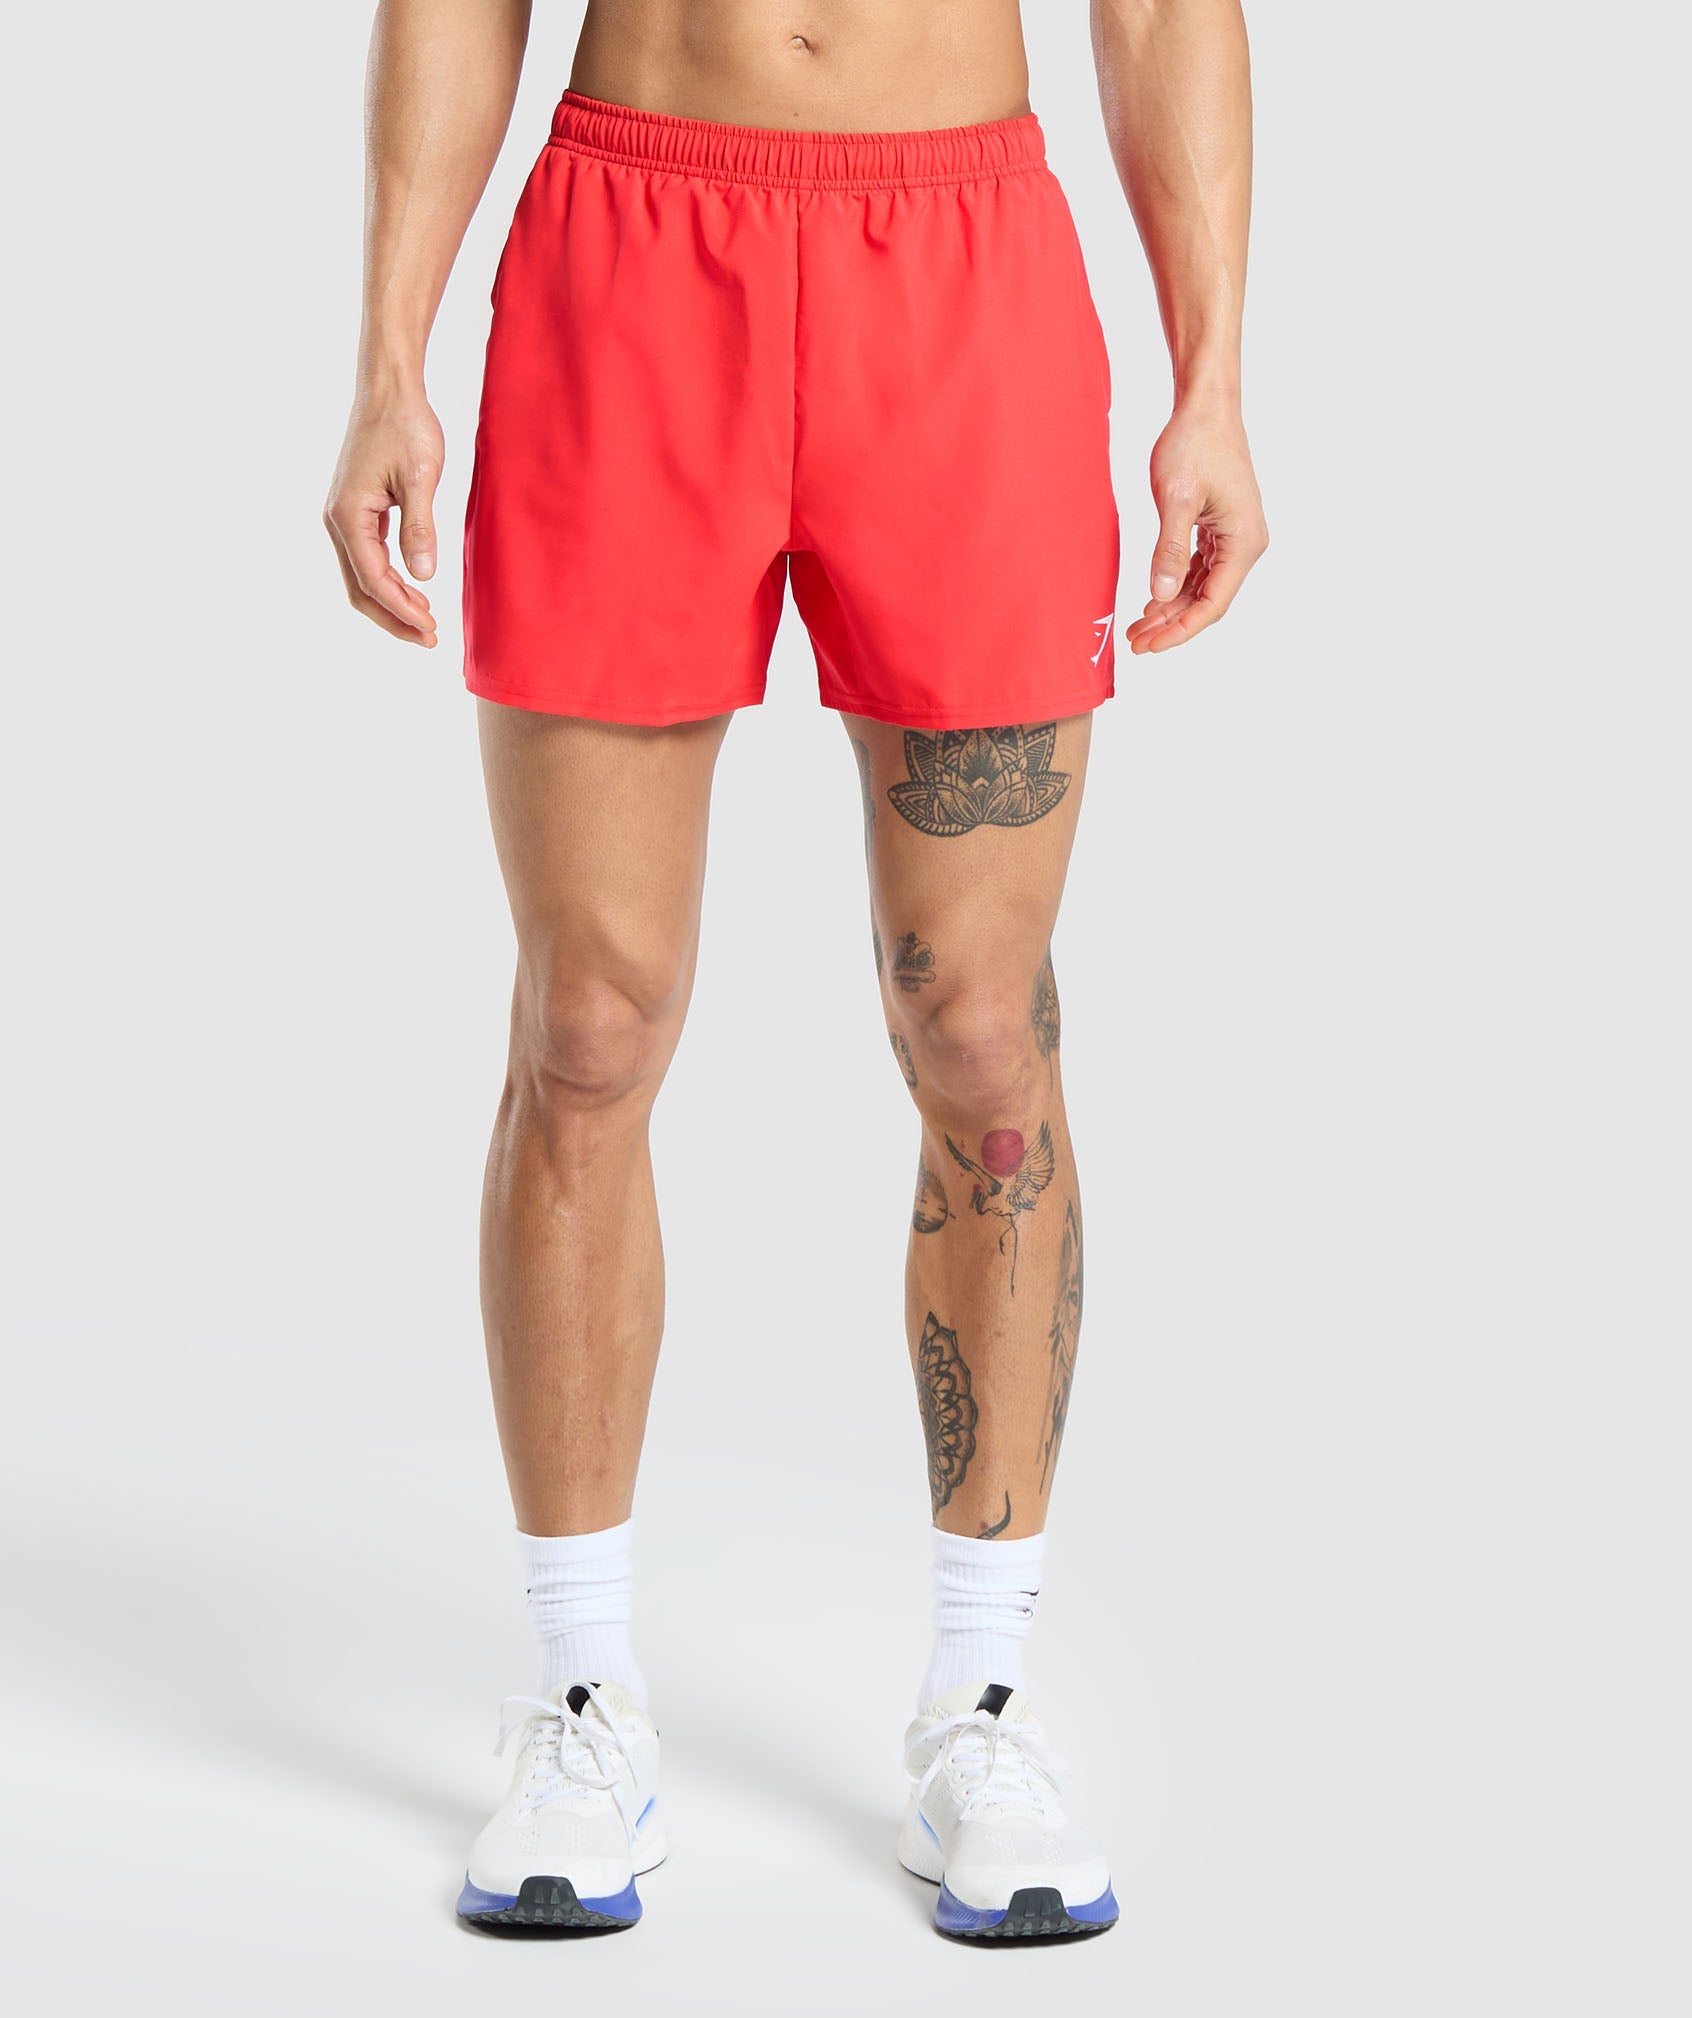 Arrival 5" Shorts in Pow Red